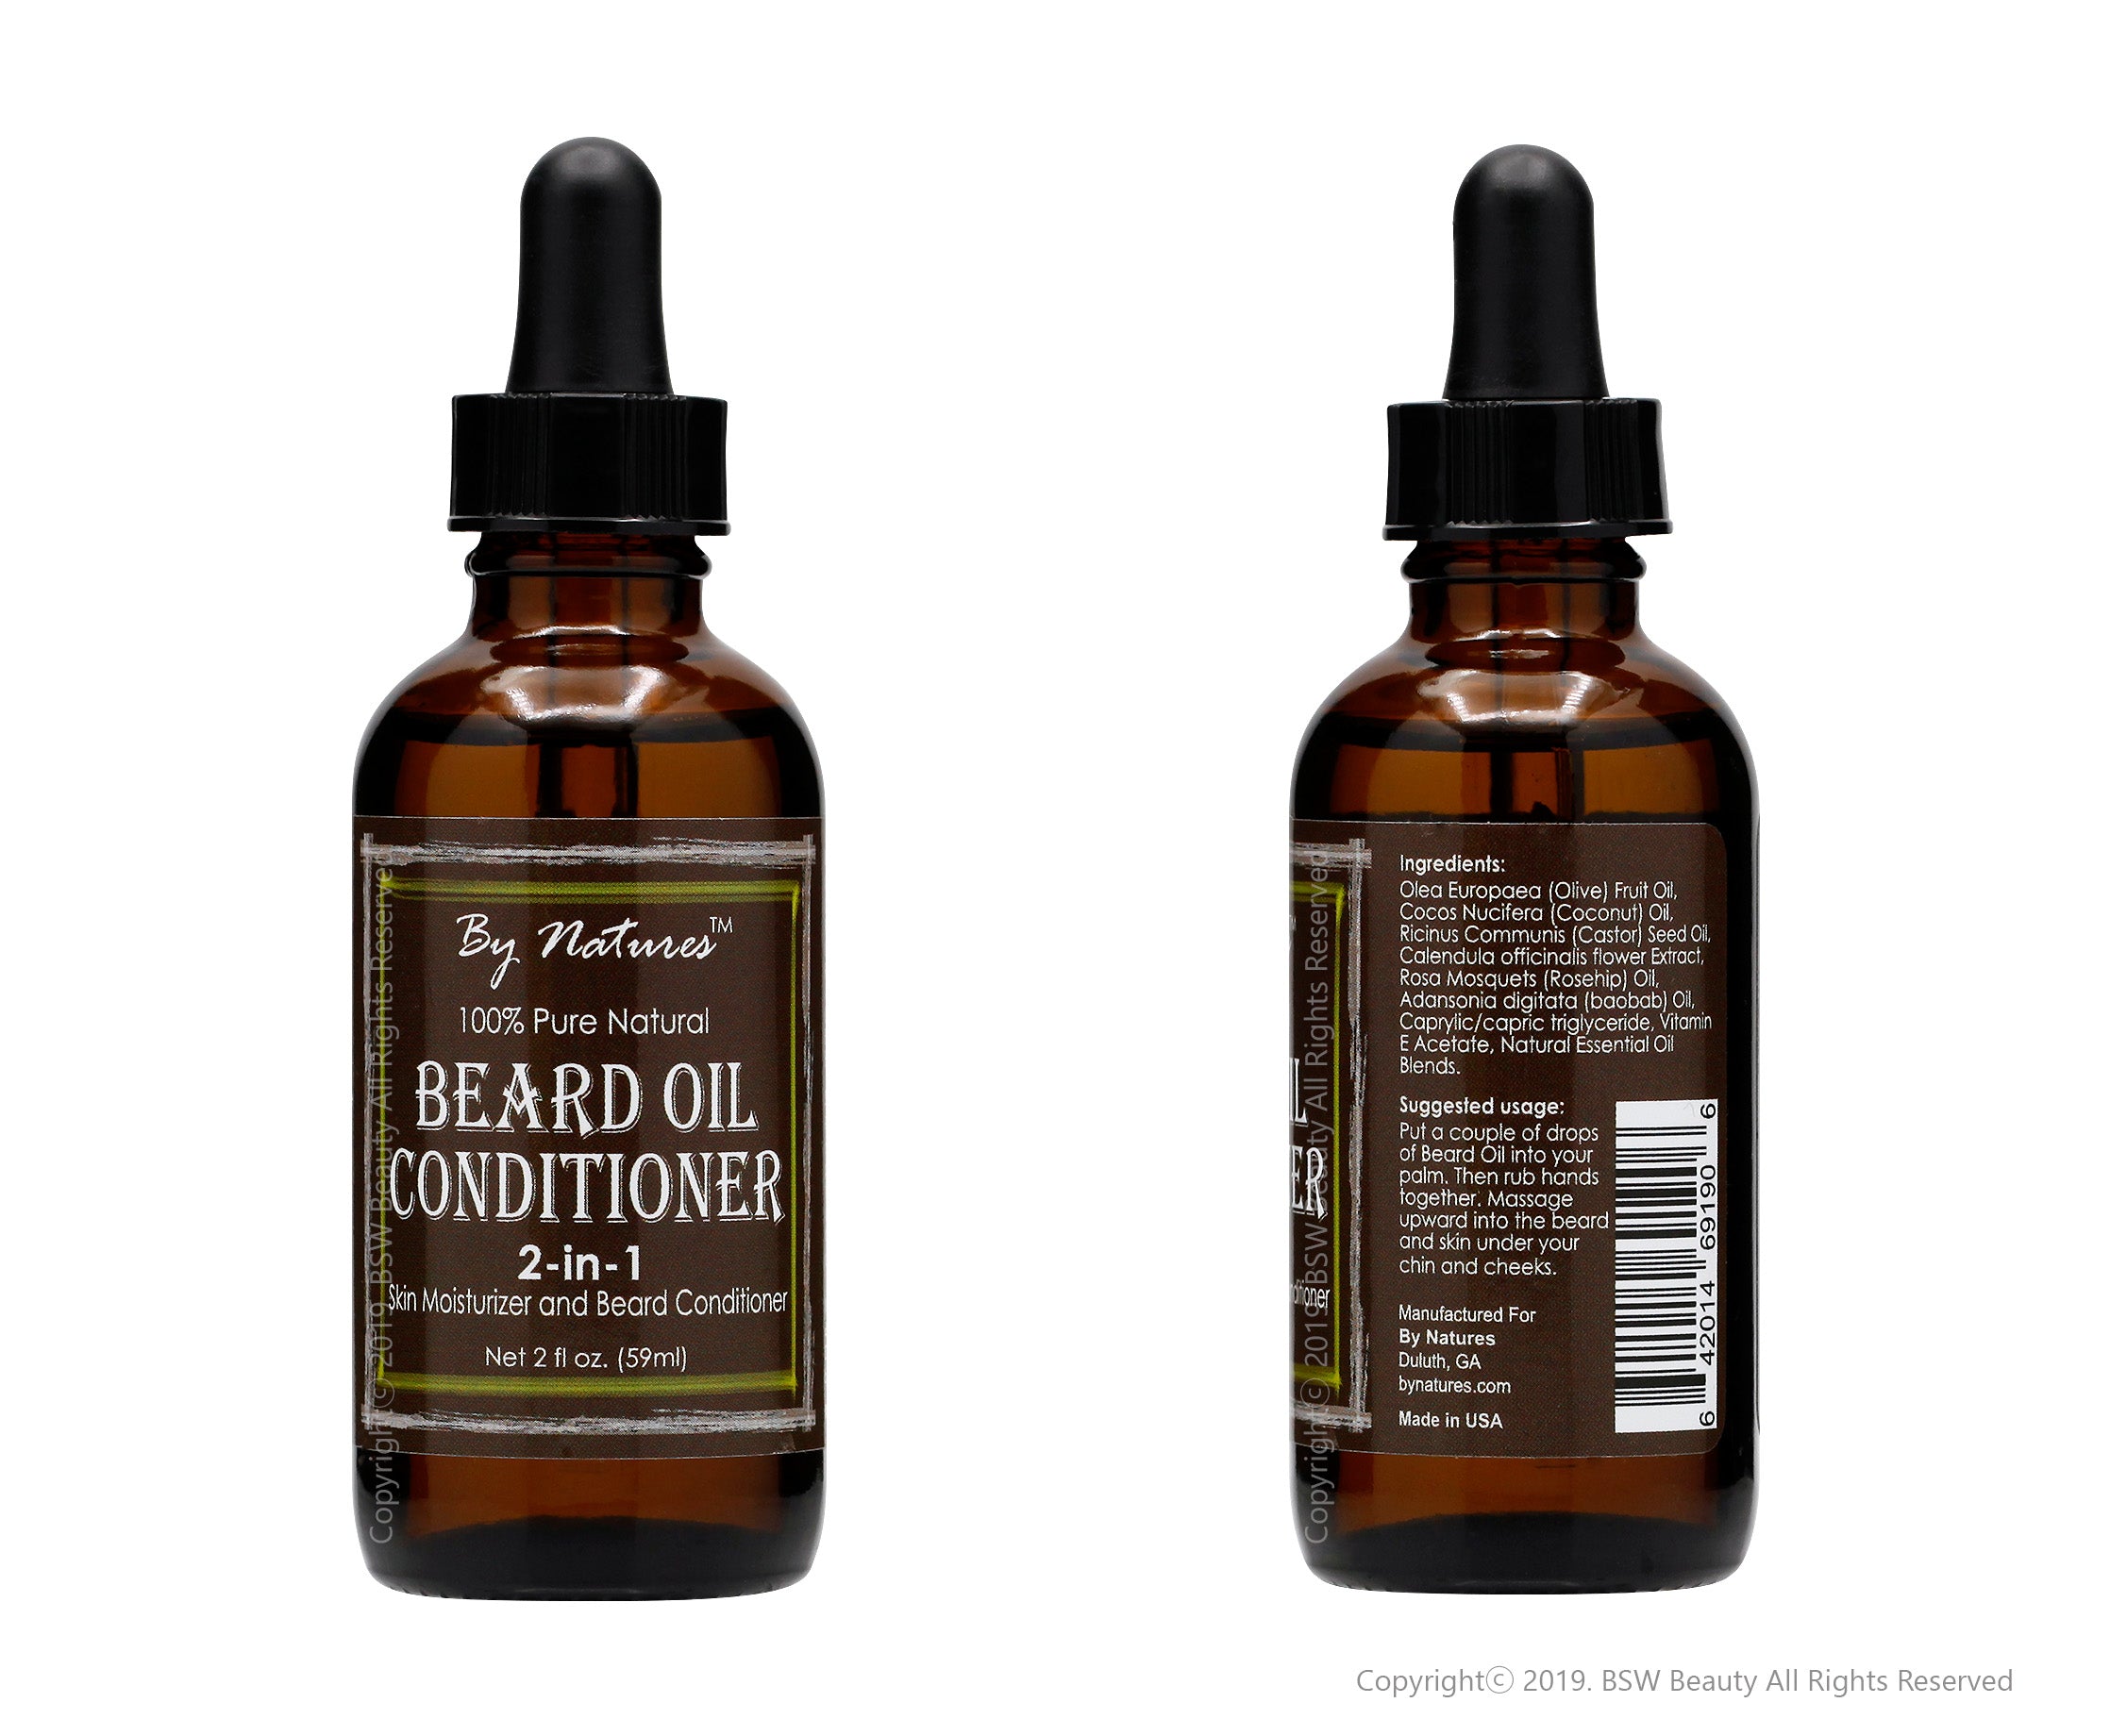 BY NATURES BEARD OIL CONDITIONER 2-IN-1 2oz